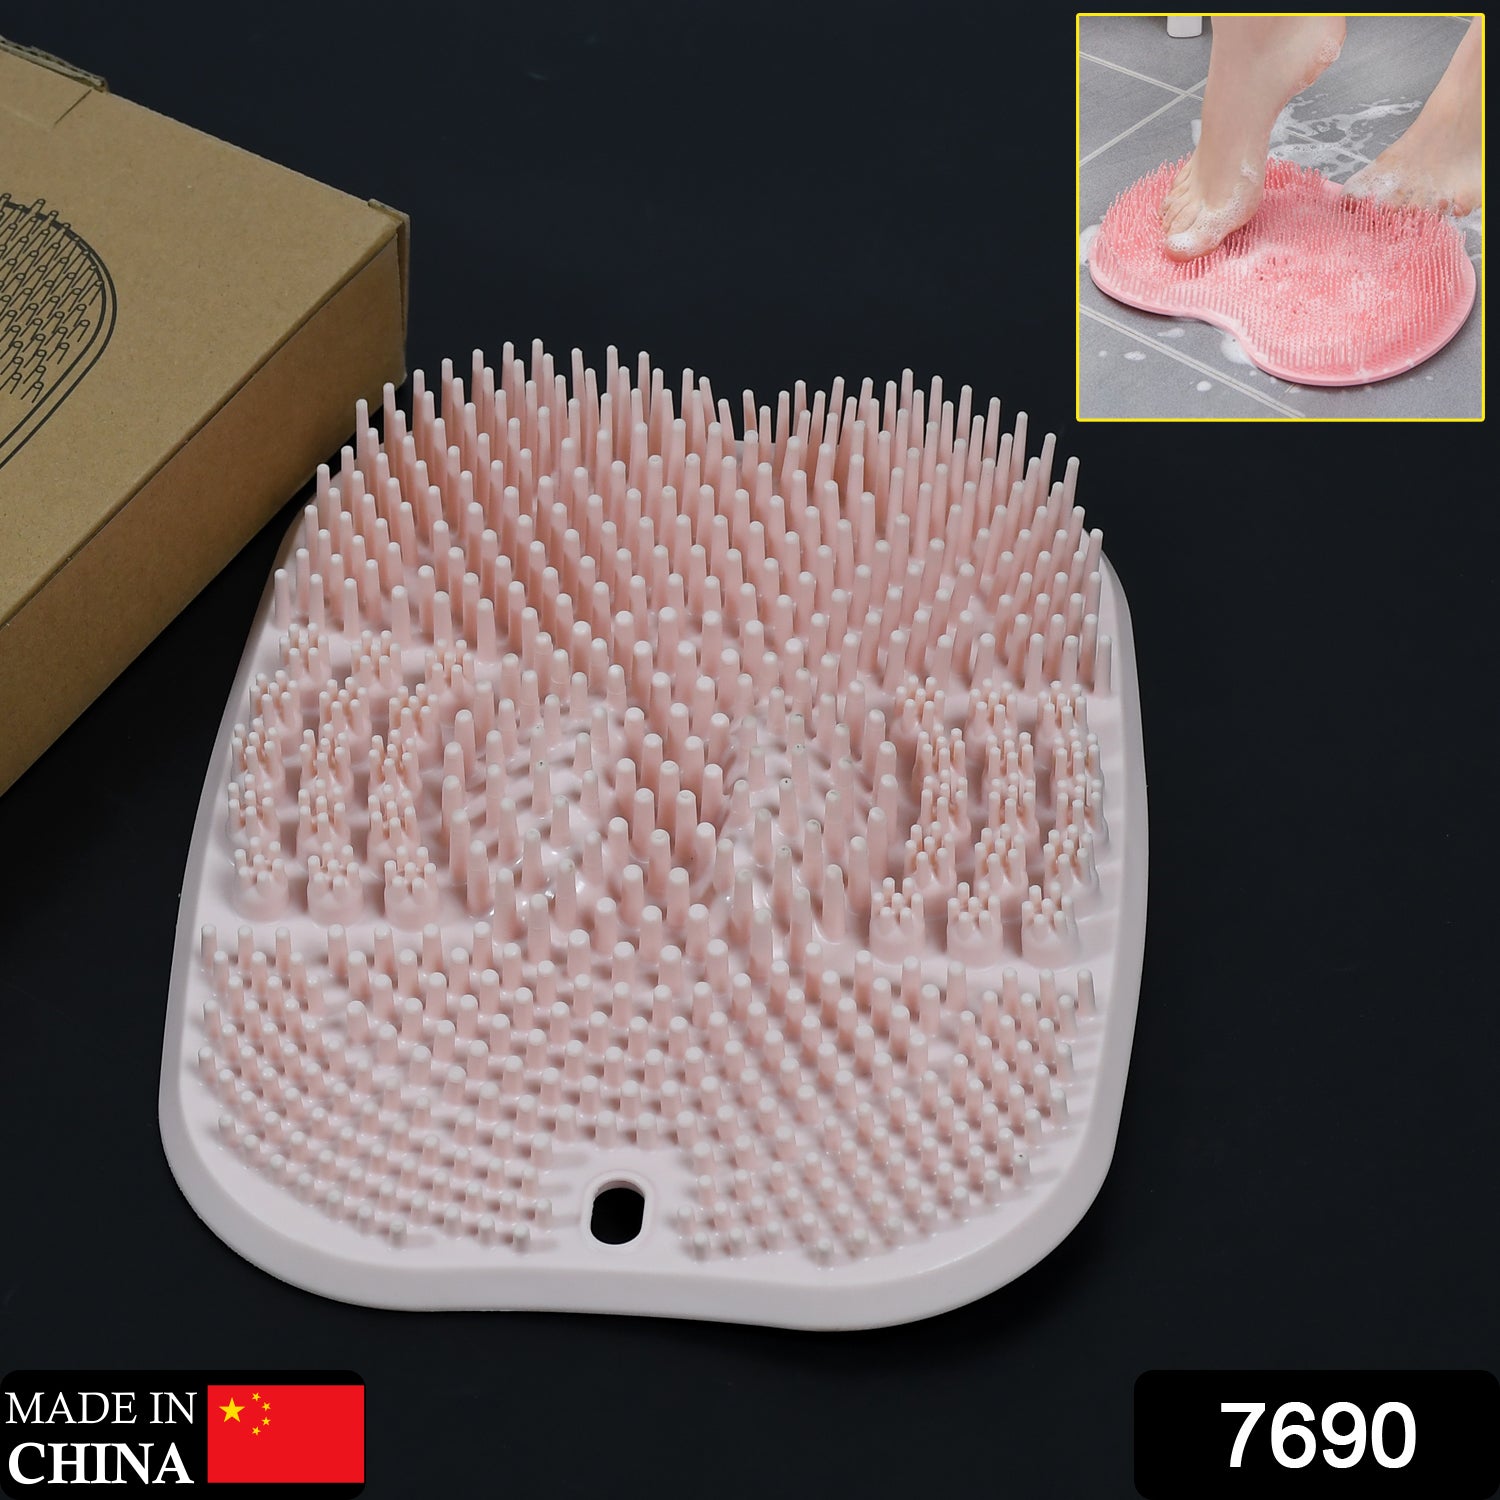 7690 Shower Foot & Back Scrubber, Massage Pad, Scrubber, Silicone Bath Massage Cushion Brush with Suction Cups, Bathroom Wash Foot Mat DeoDap